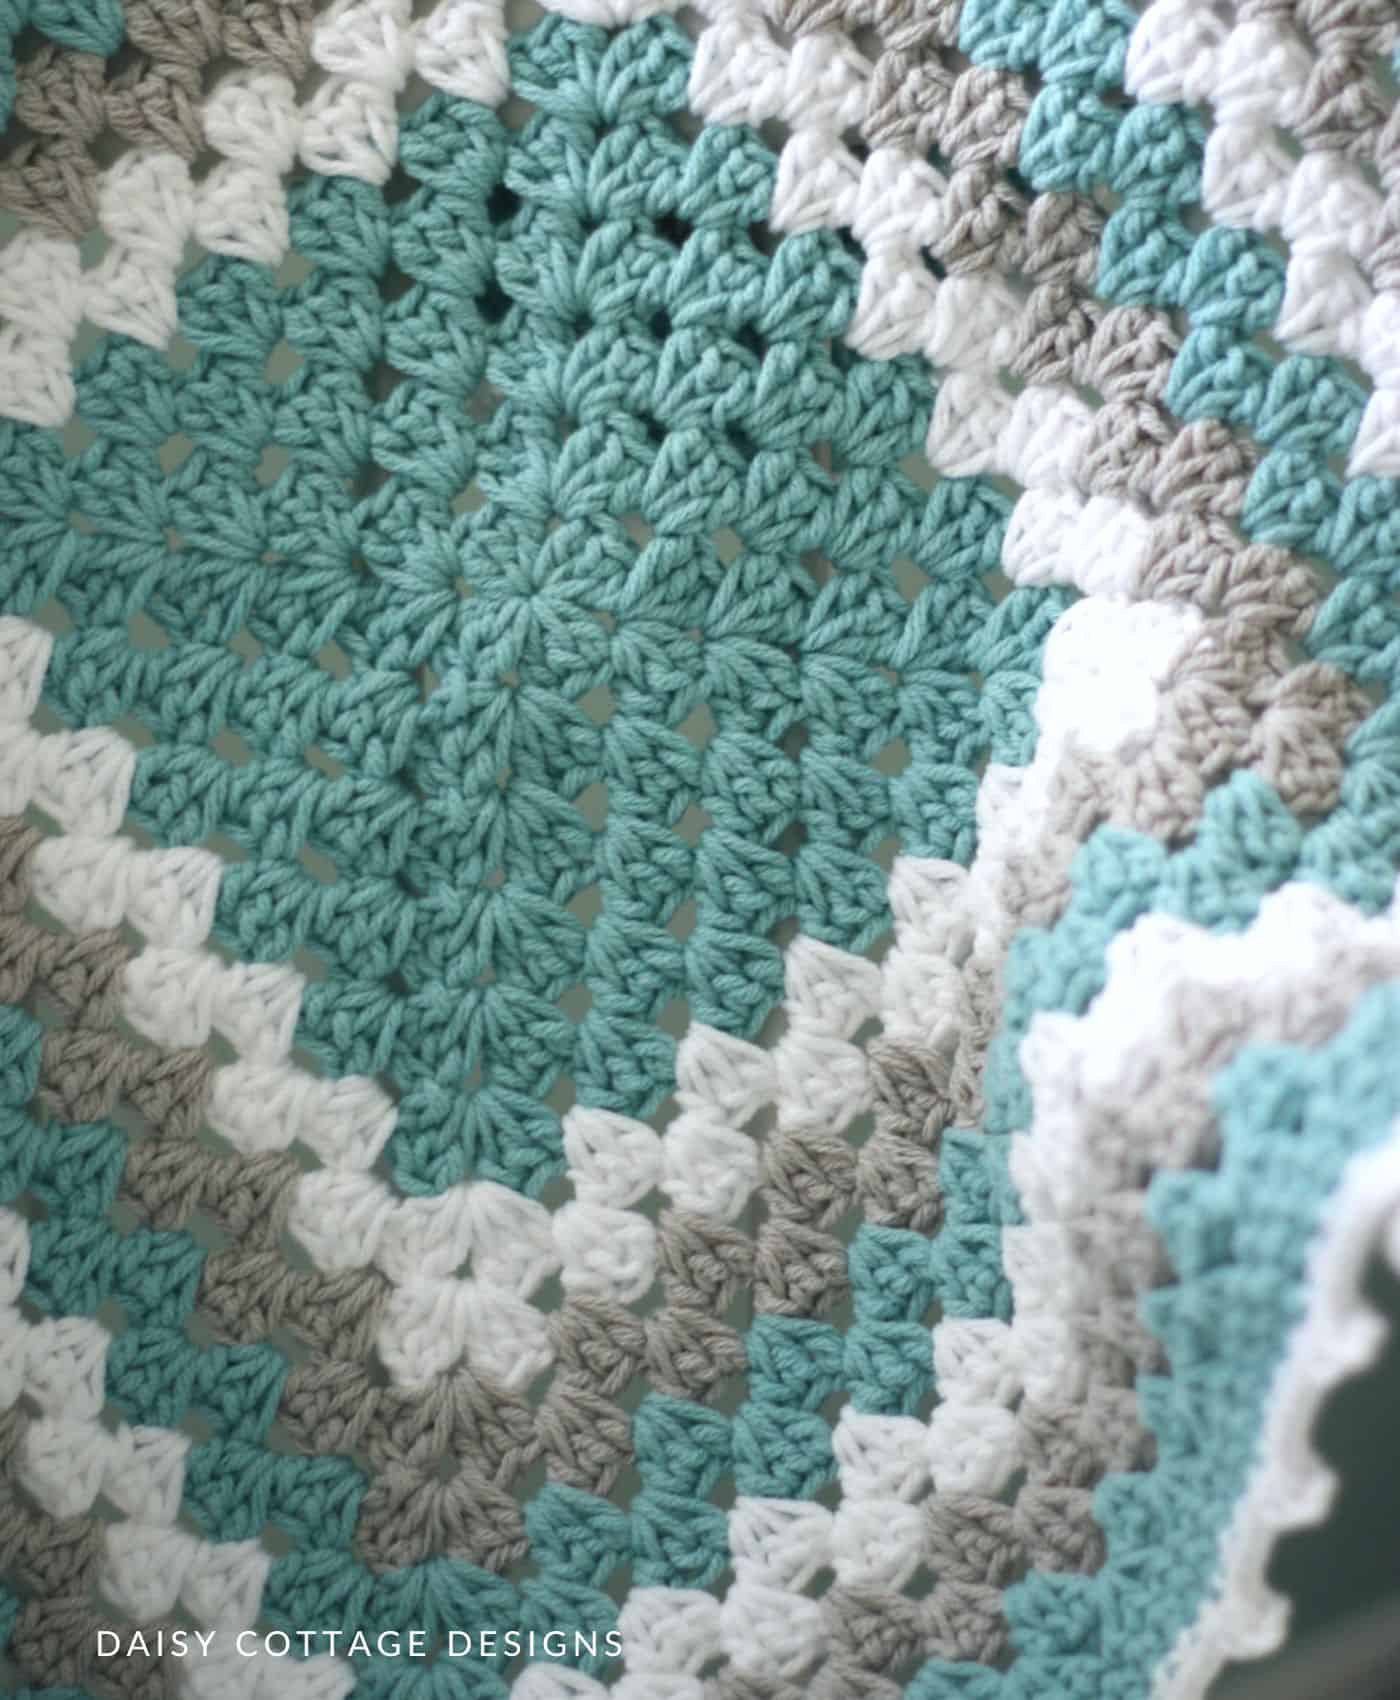 Easy granny square blanket in teal and white